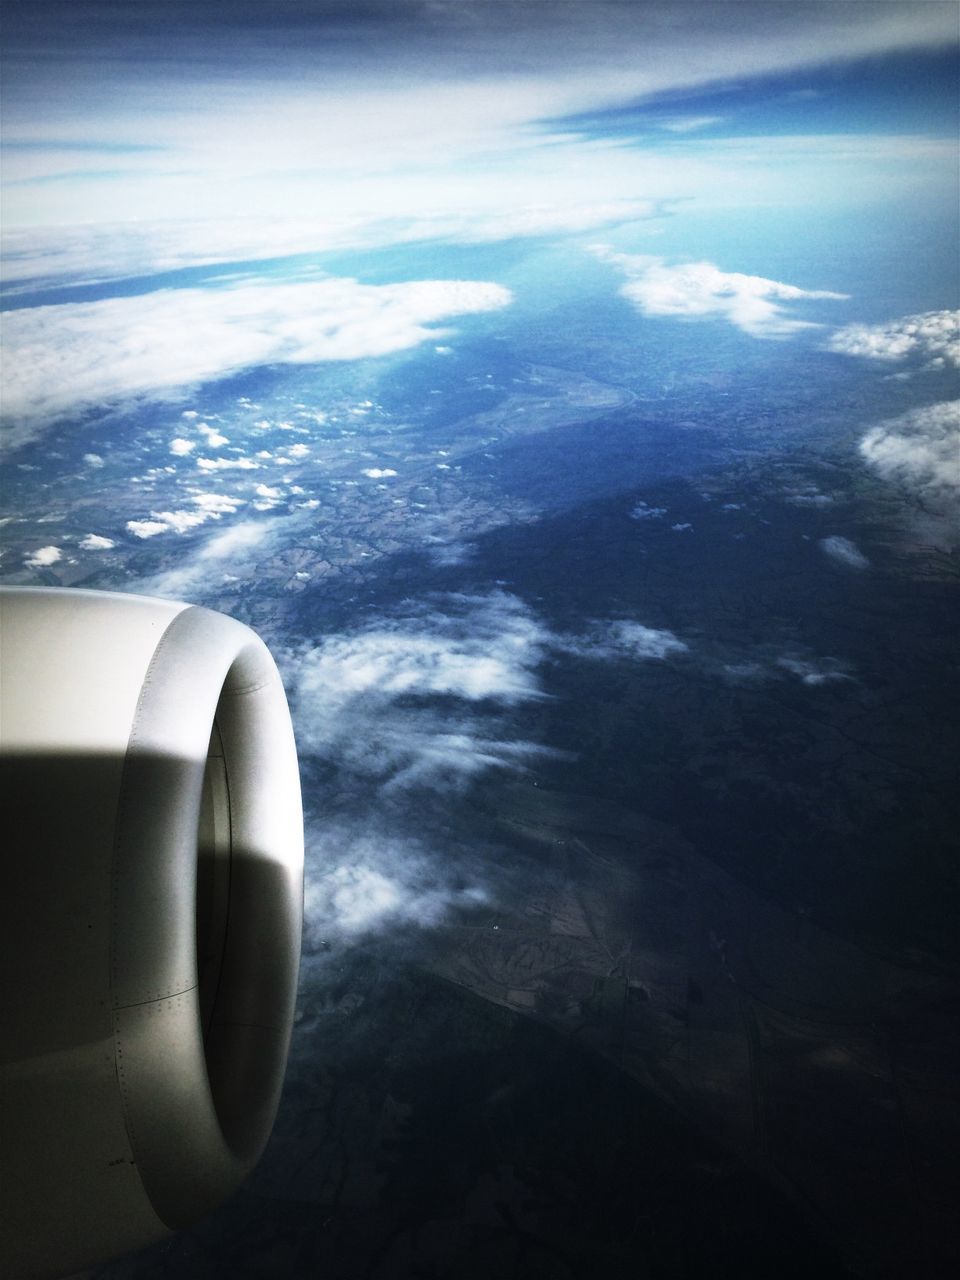 View of airplane jet engine above clouds